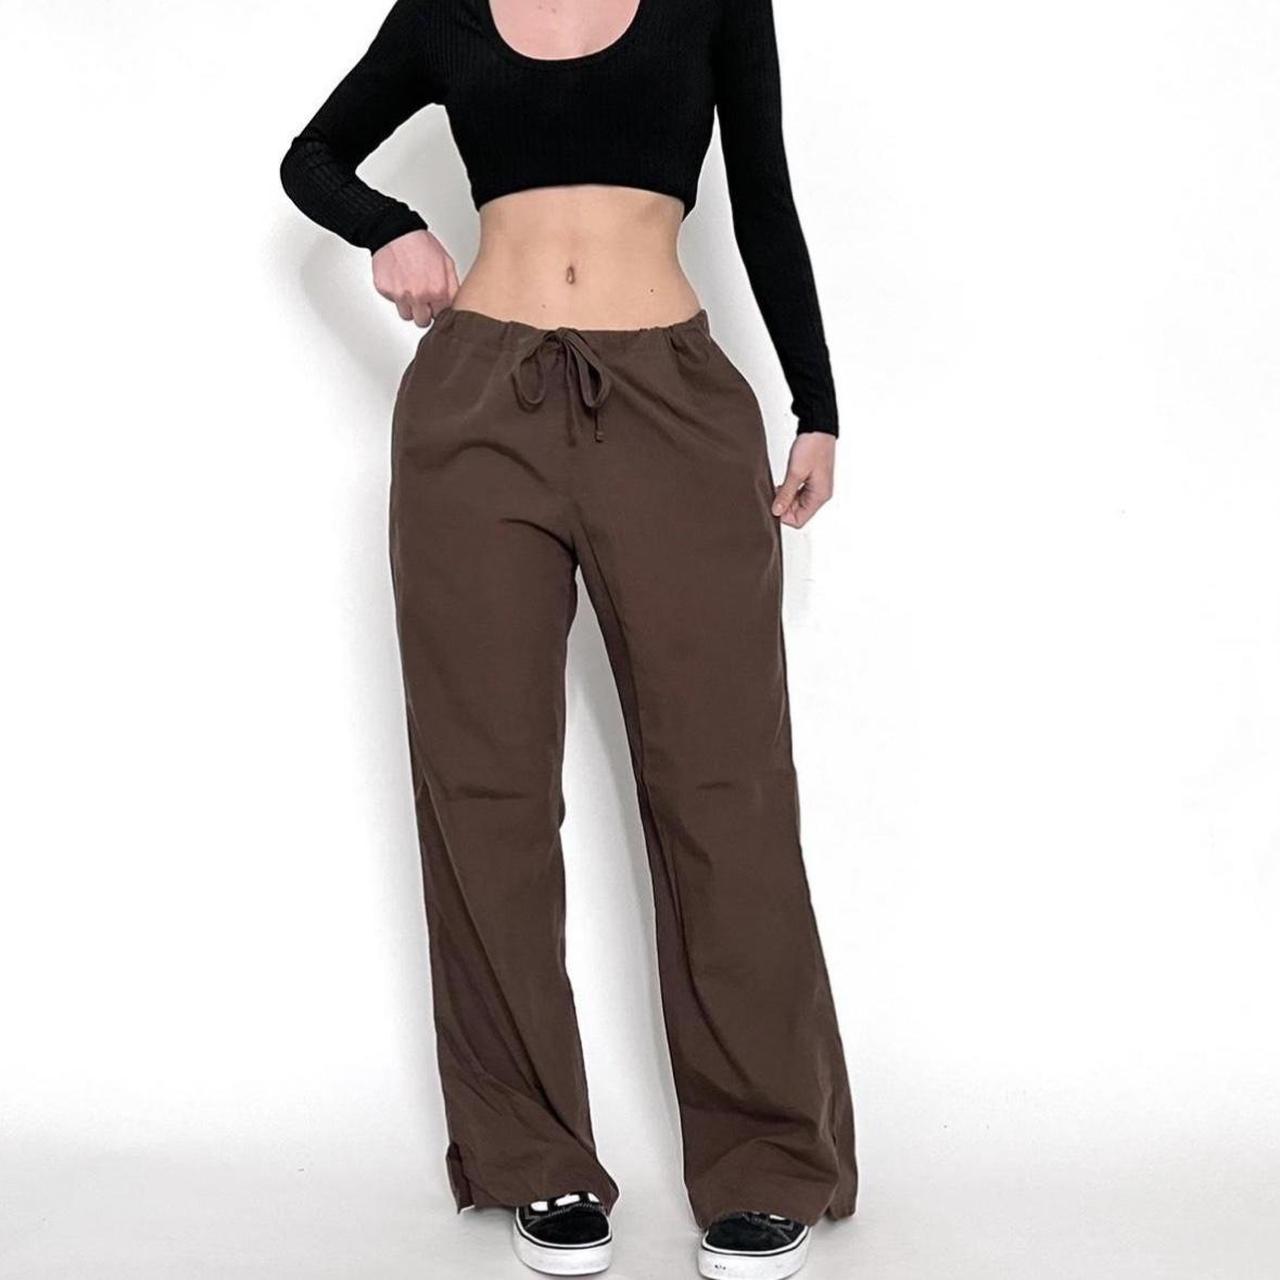 Brown parachute pants, - stretchy and adjustable , -...